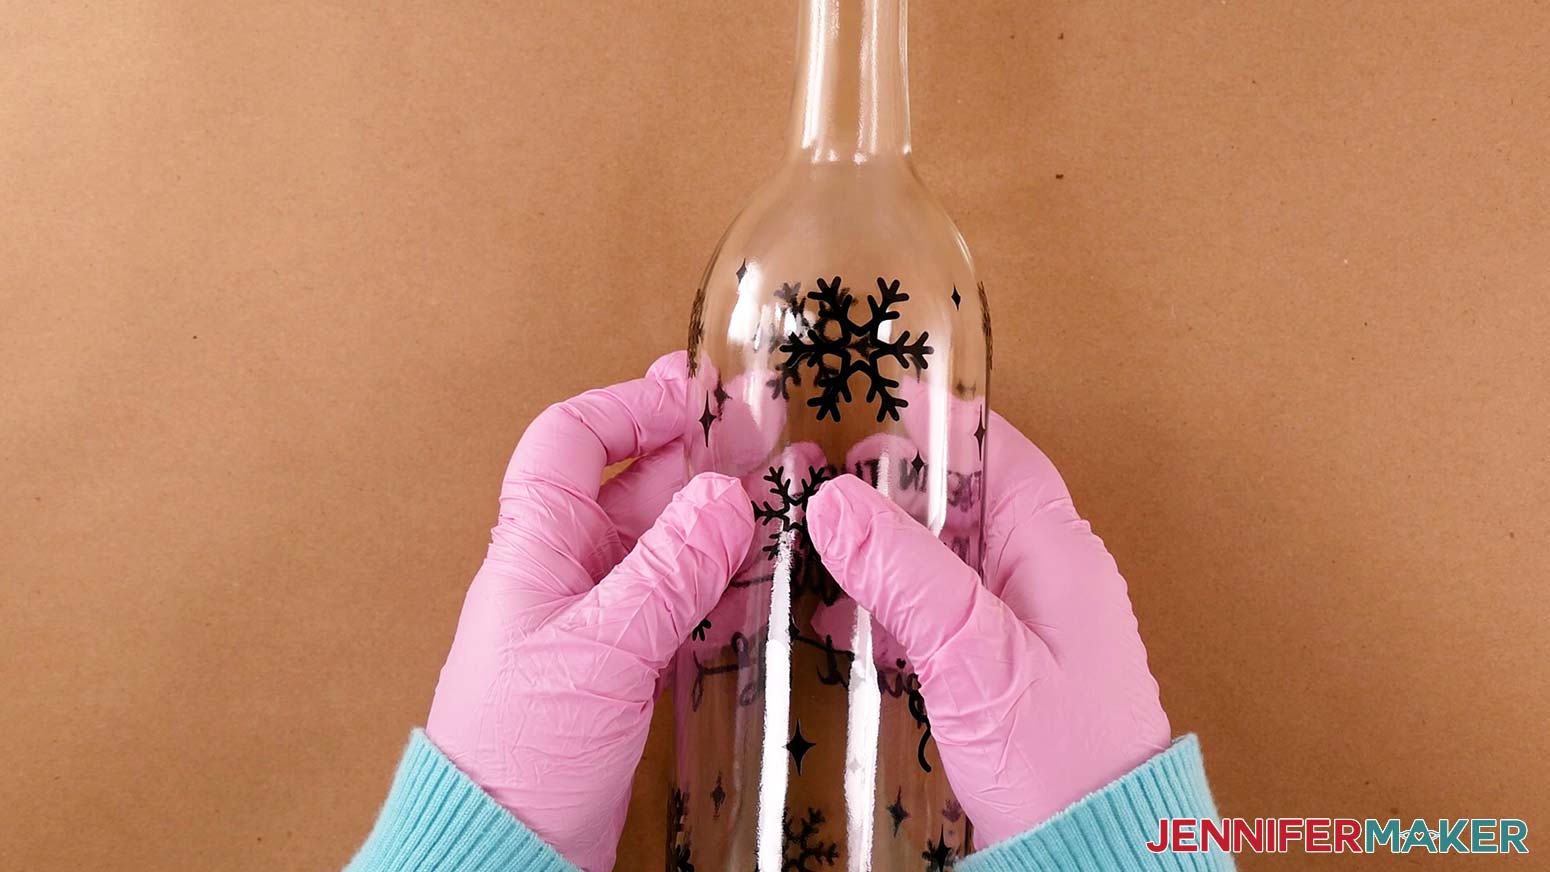 Press the vinyl stencil onto your wine bottle really well with your fingers before applying etching cream to prevent the cream from seeping underneath